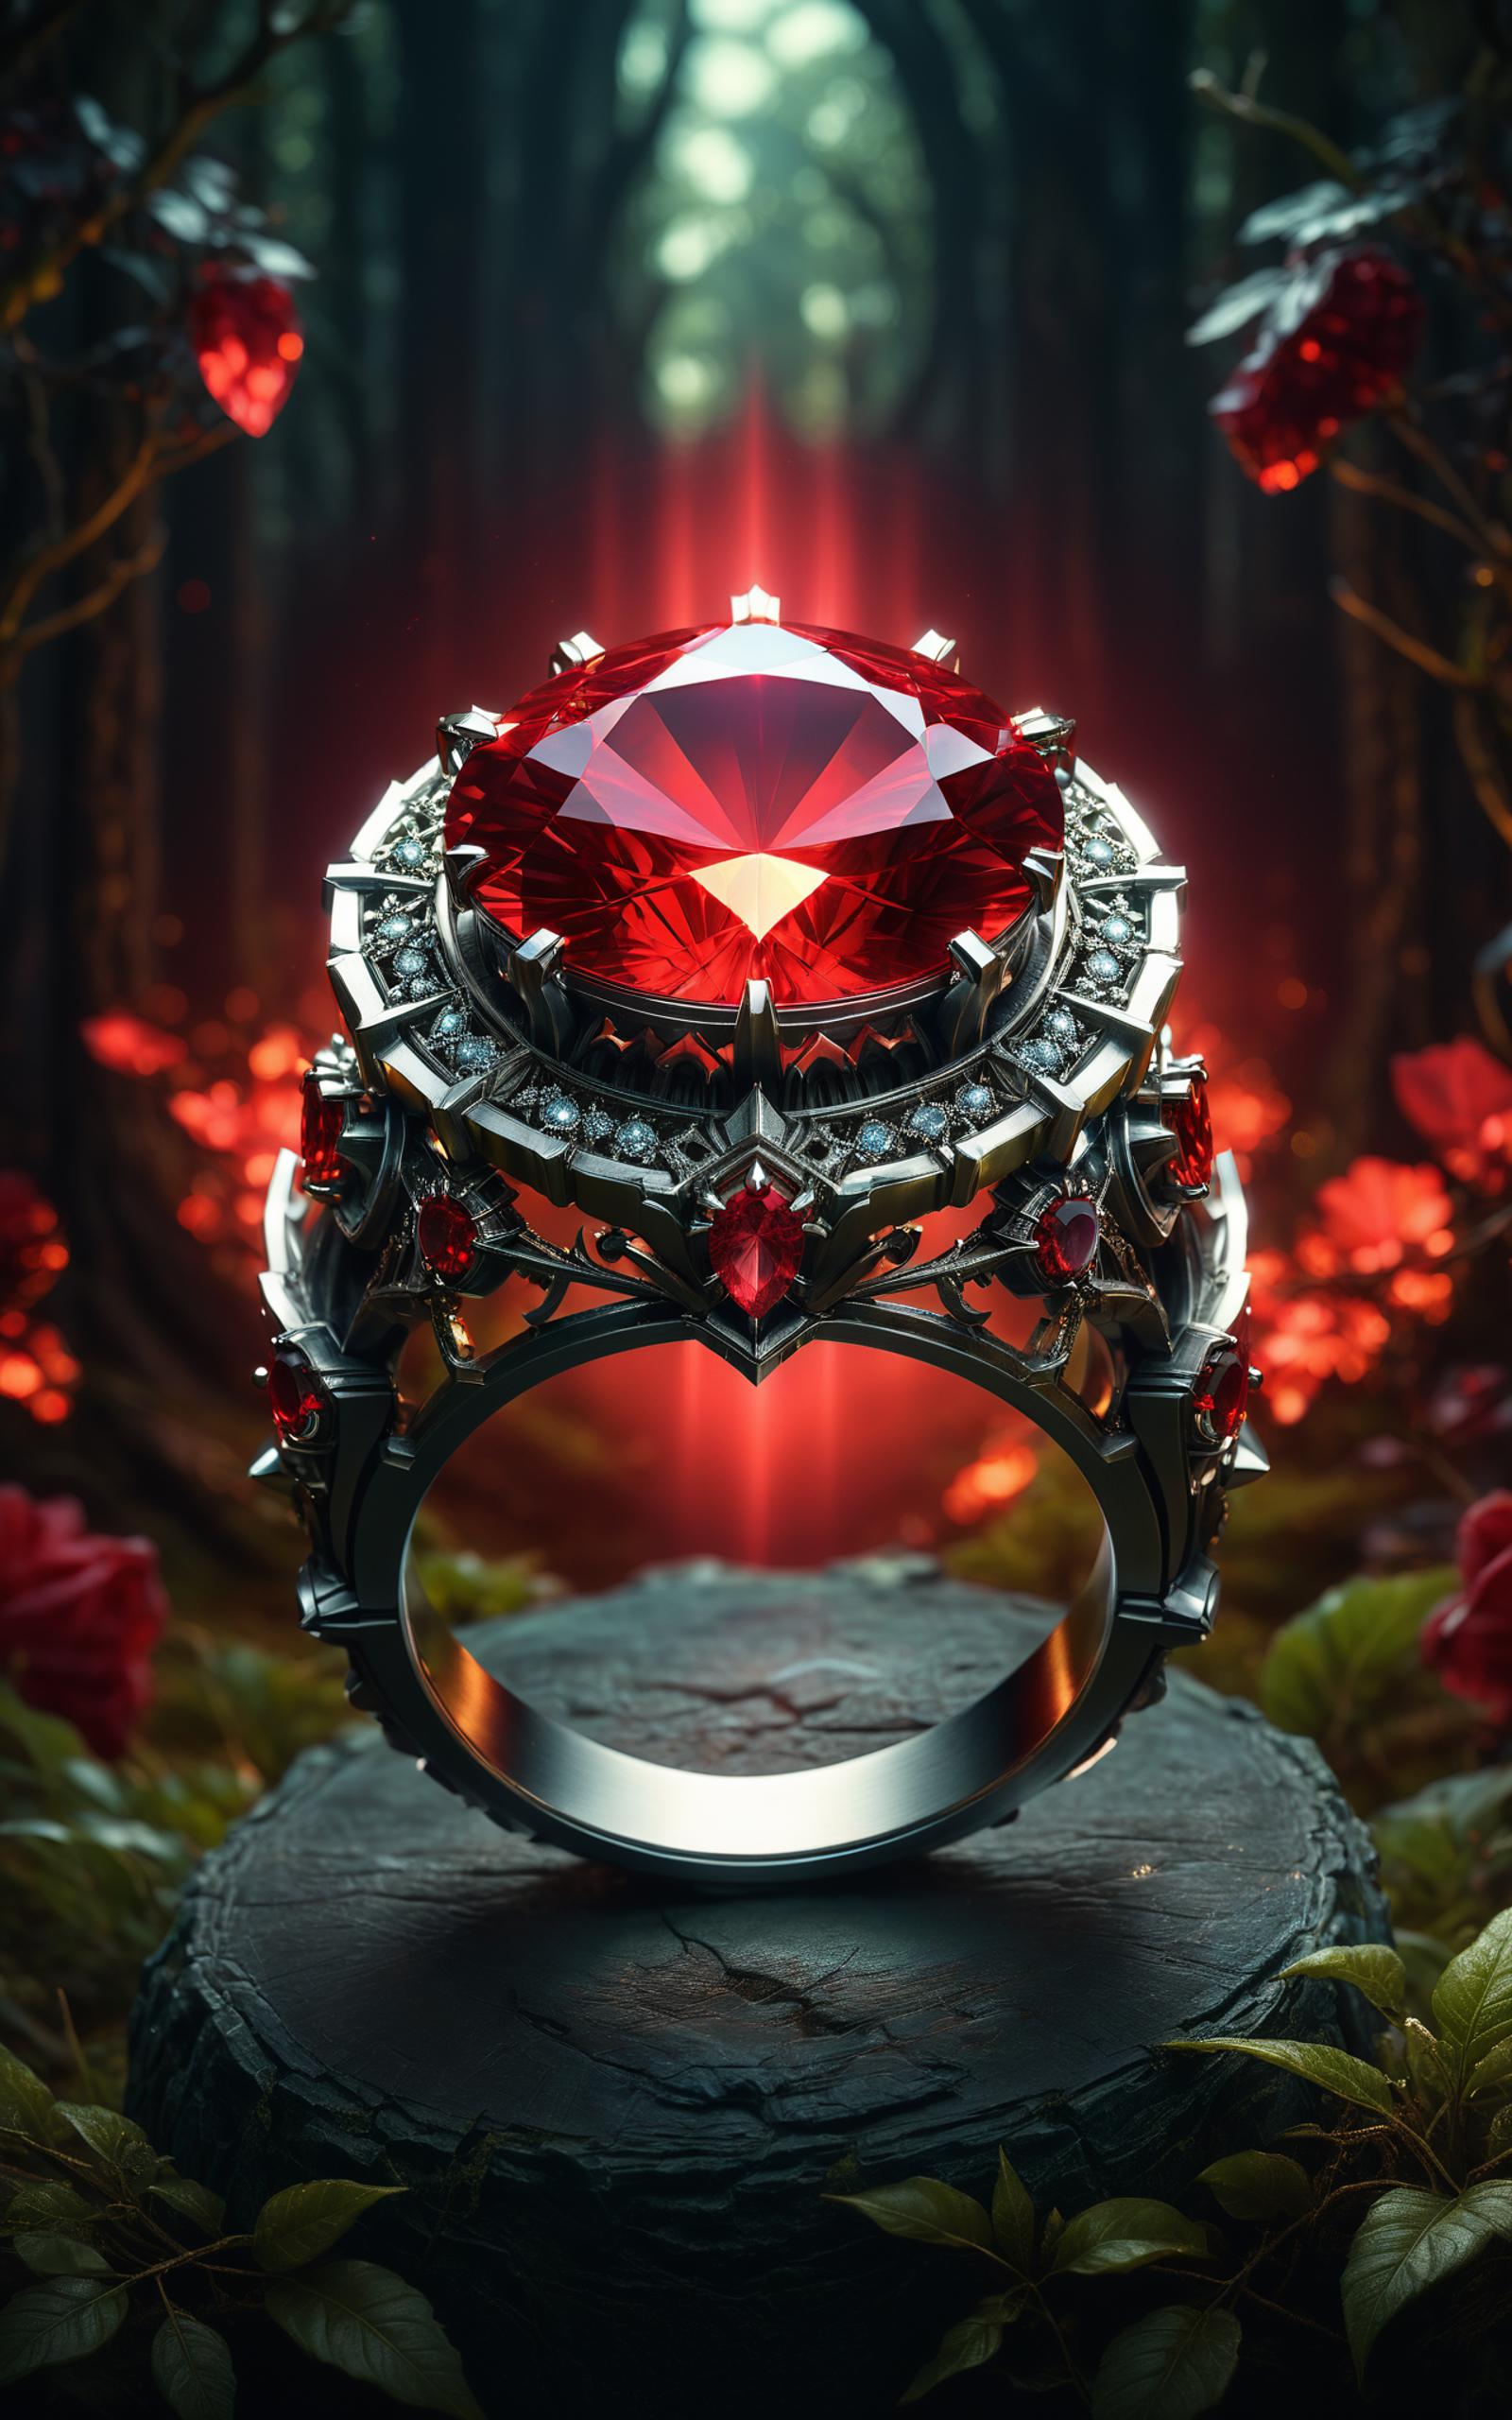 A Ring with Red Gemstones and a Silver Frame on a Black Background.